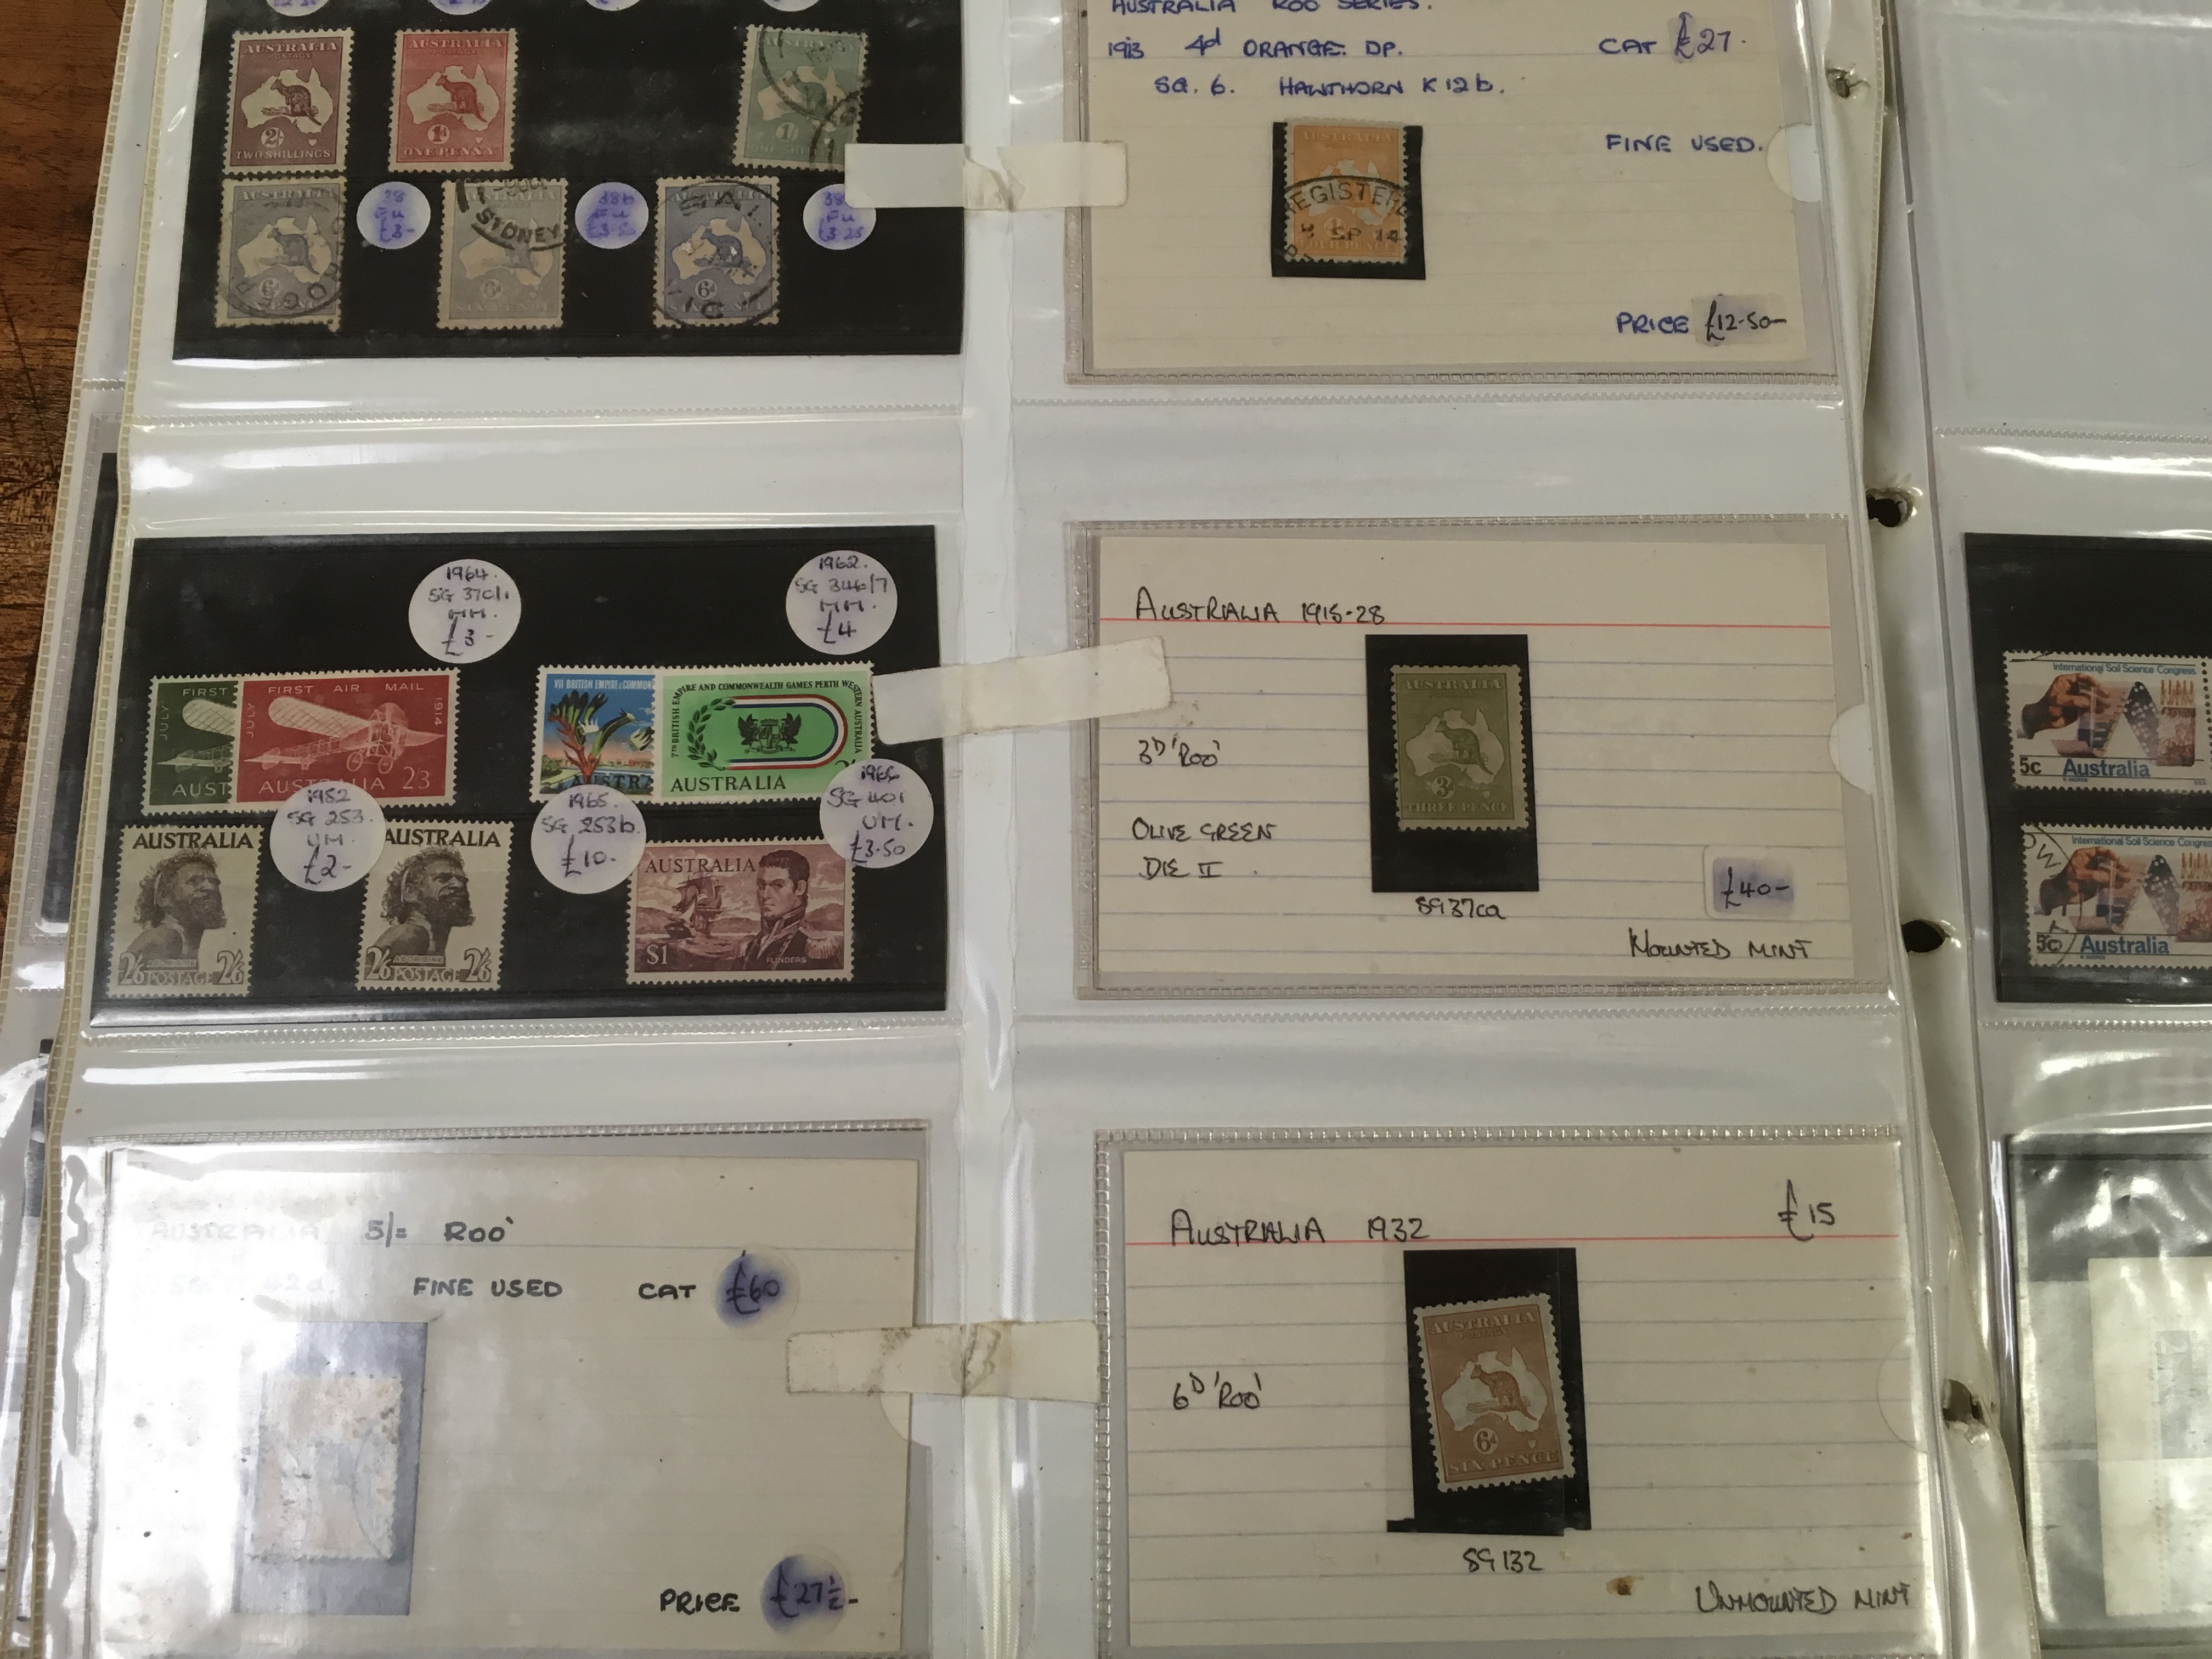 AUSTRALIA: EX DEALER'S STOCK OF SETS AND SINGLES ON PAGES, - Image 10 of 10